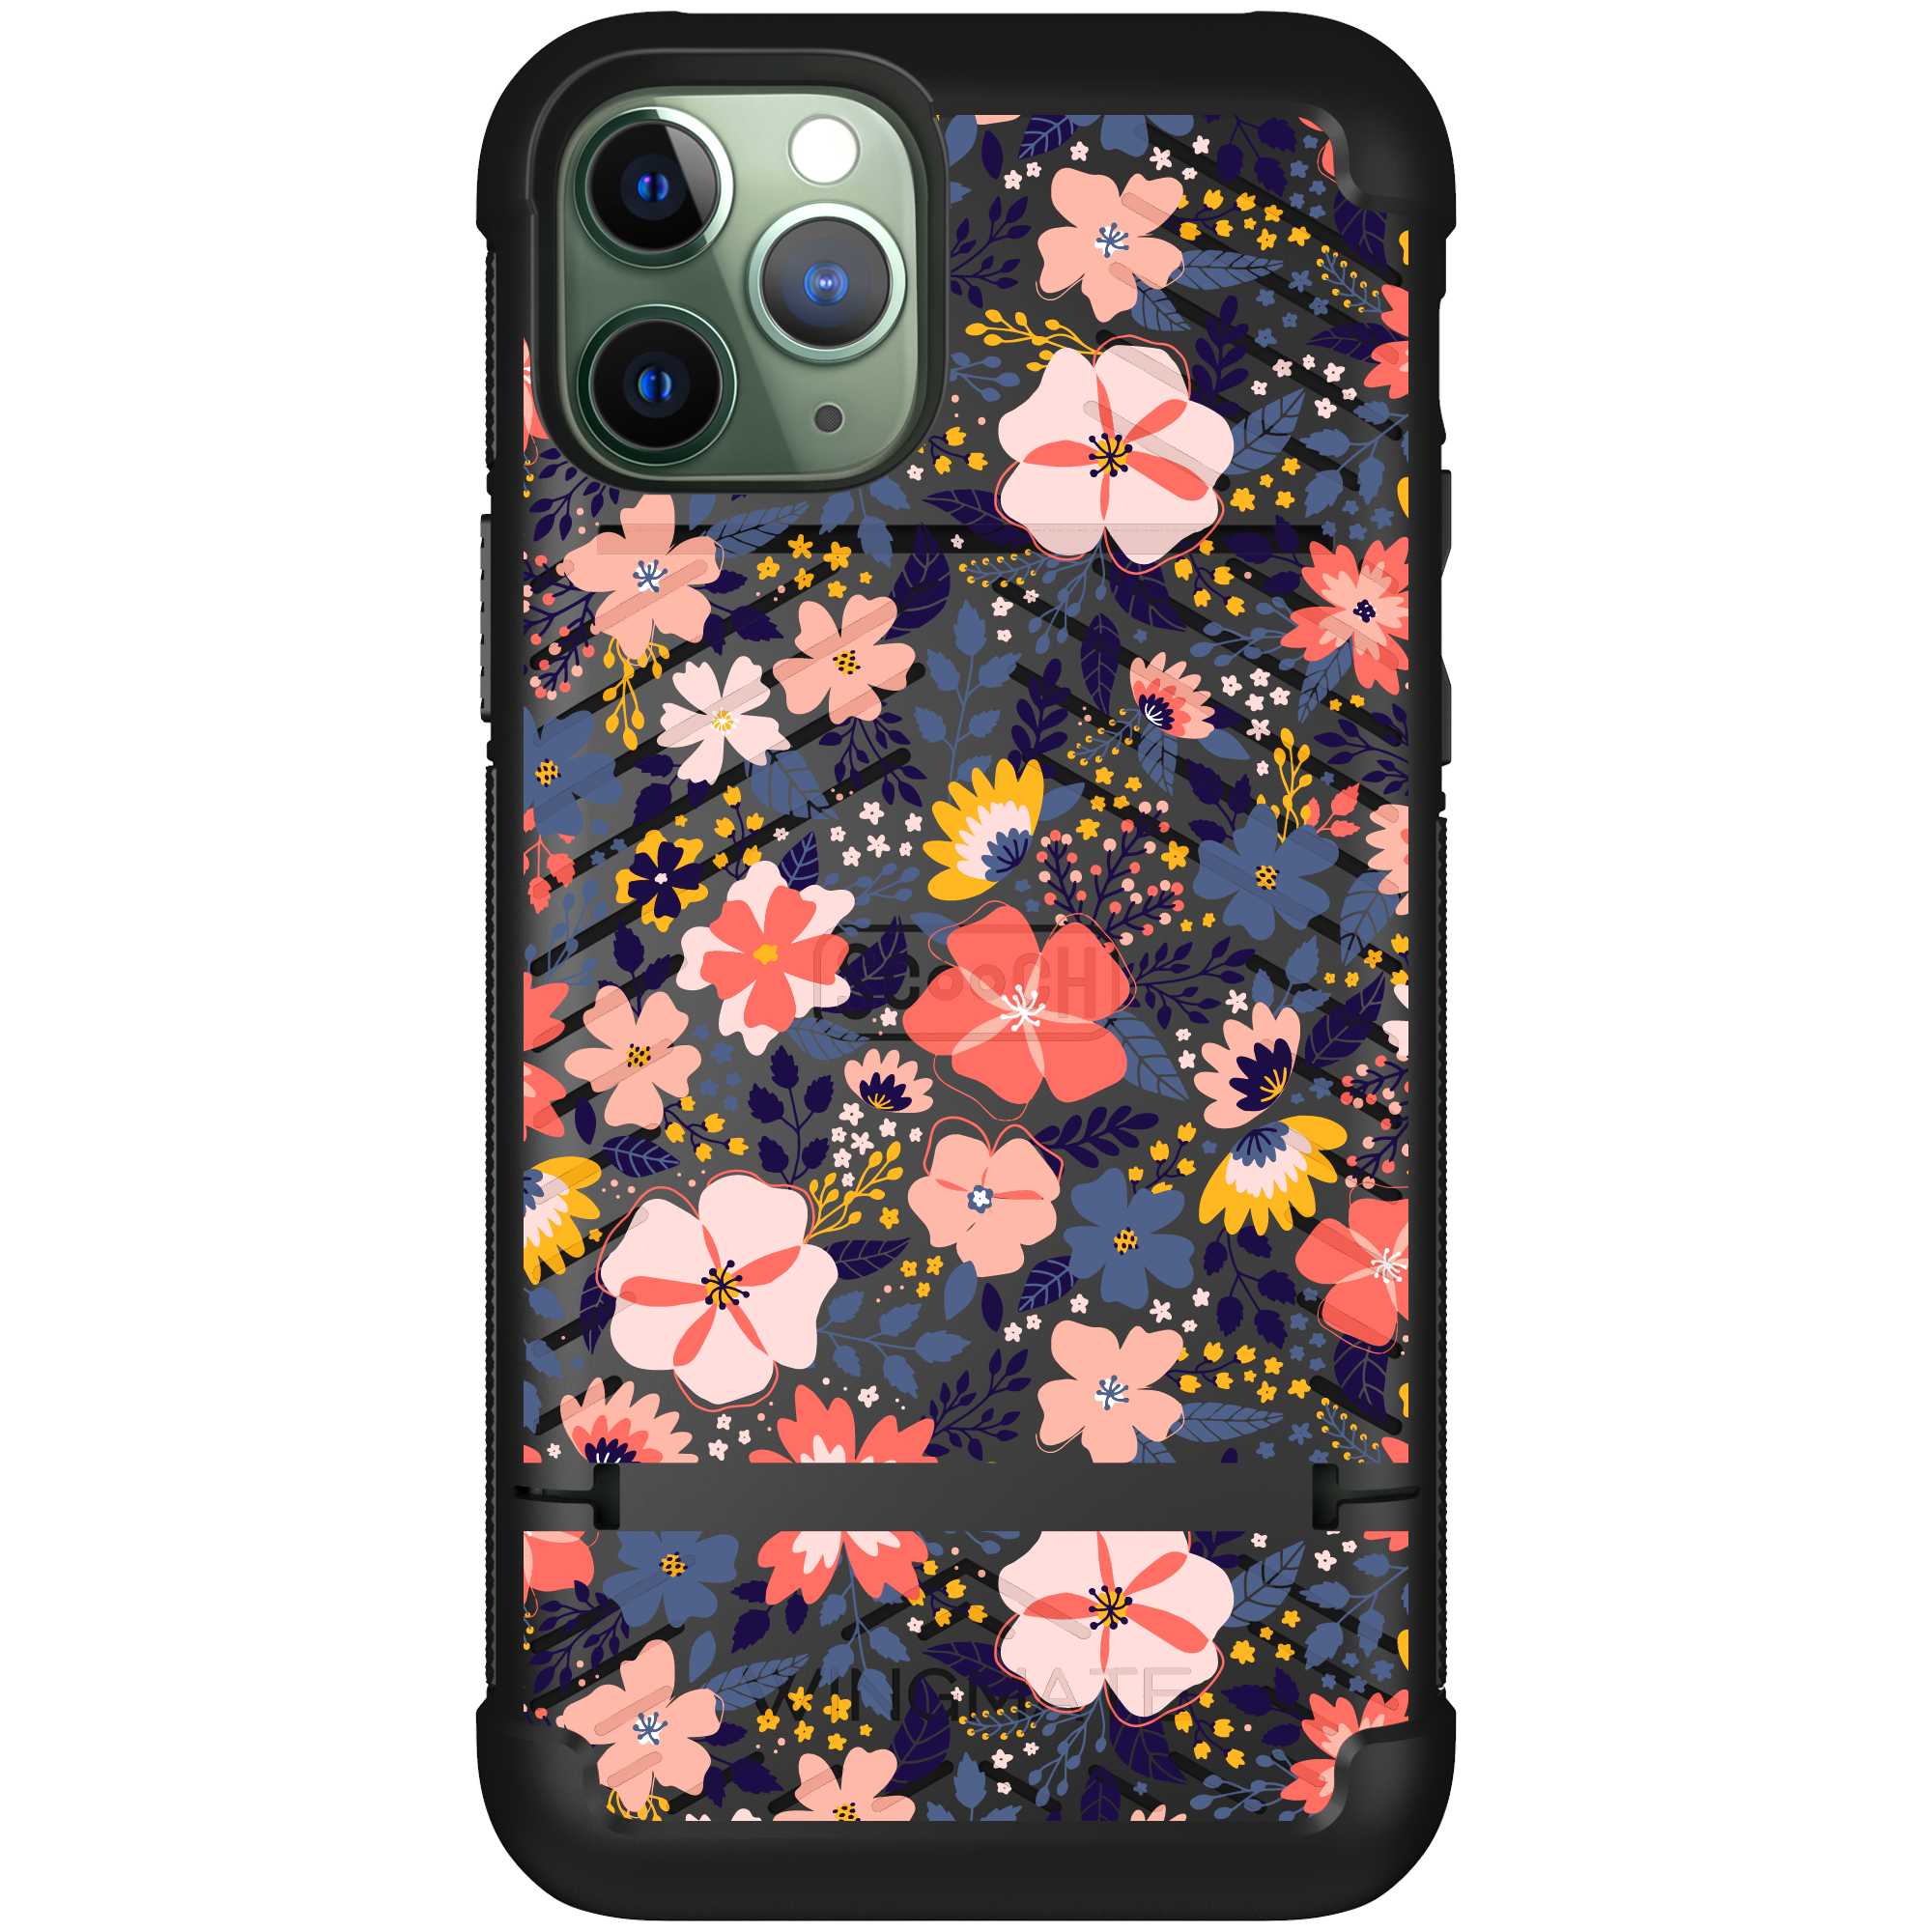 Scooch-Wingmate for iPhone 11 Pro-Wildflowers